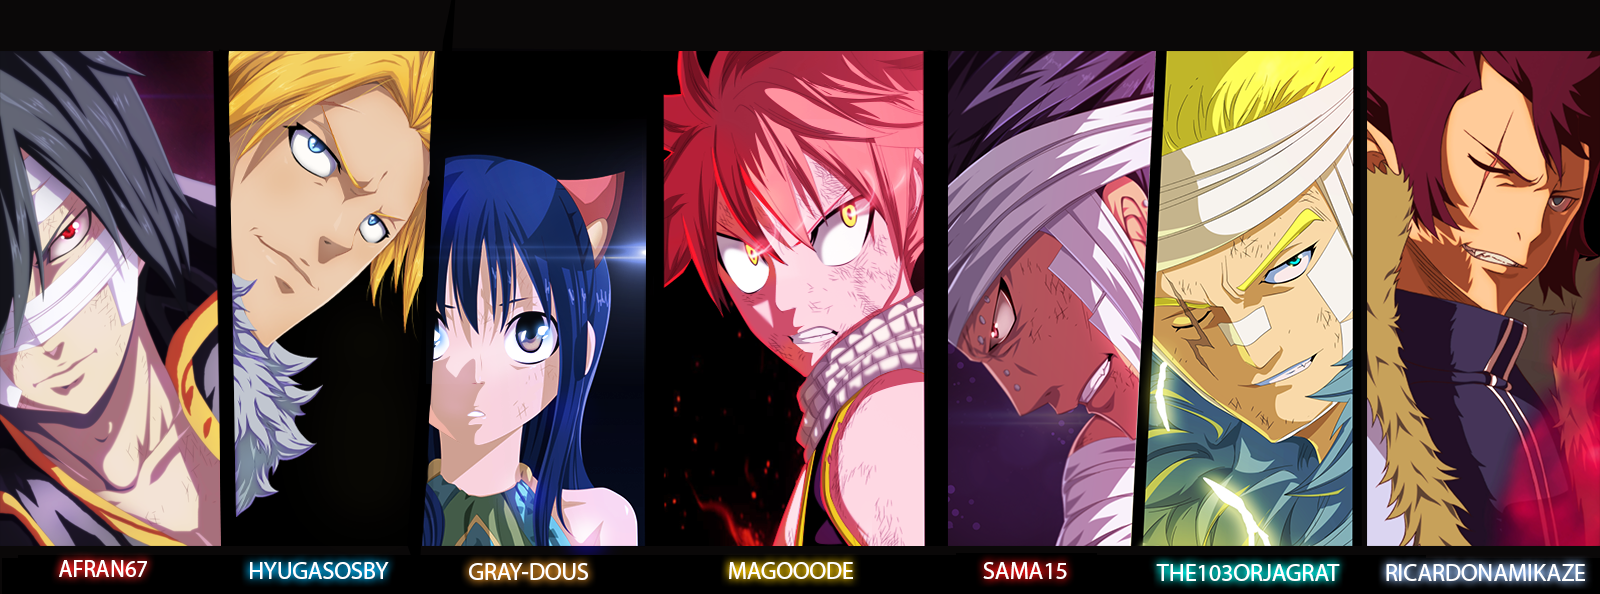 Anime Fairy Tail Picture by afran67